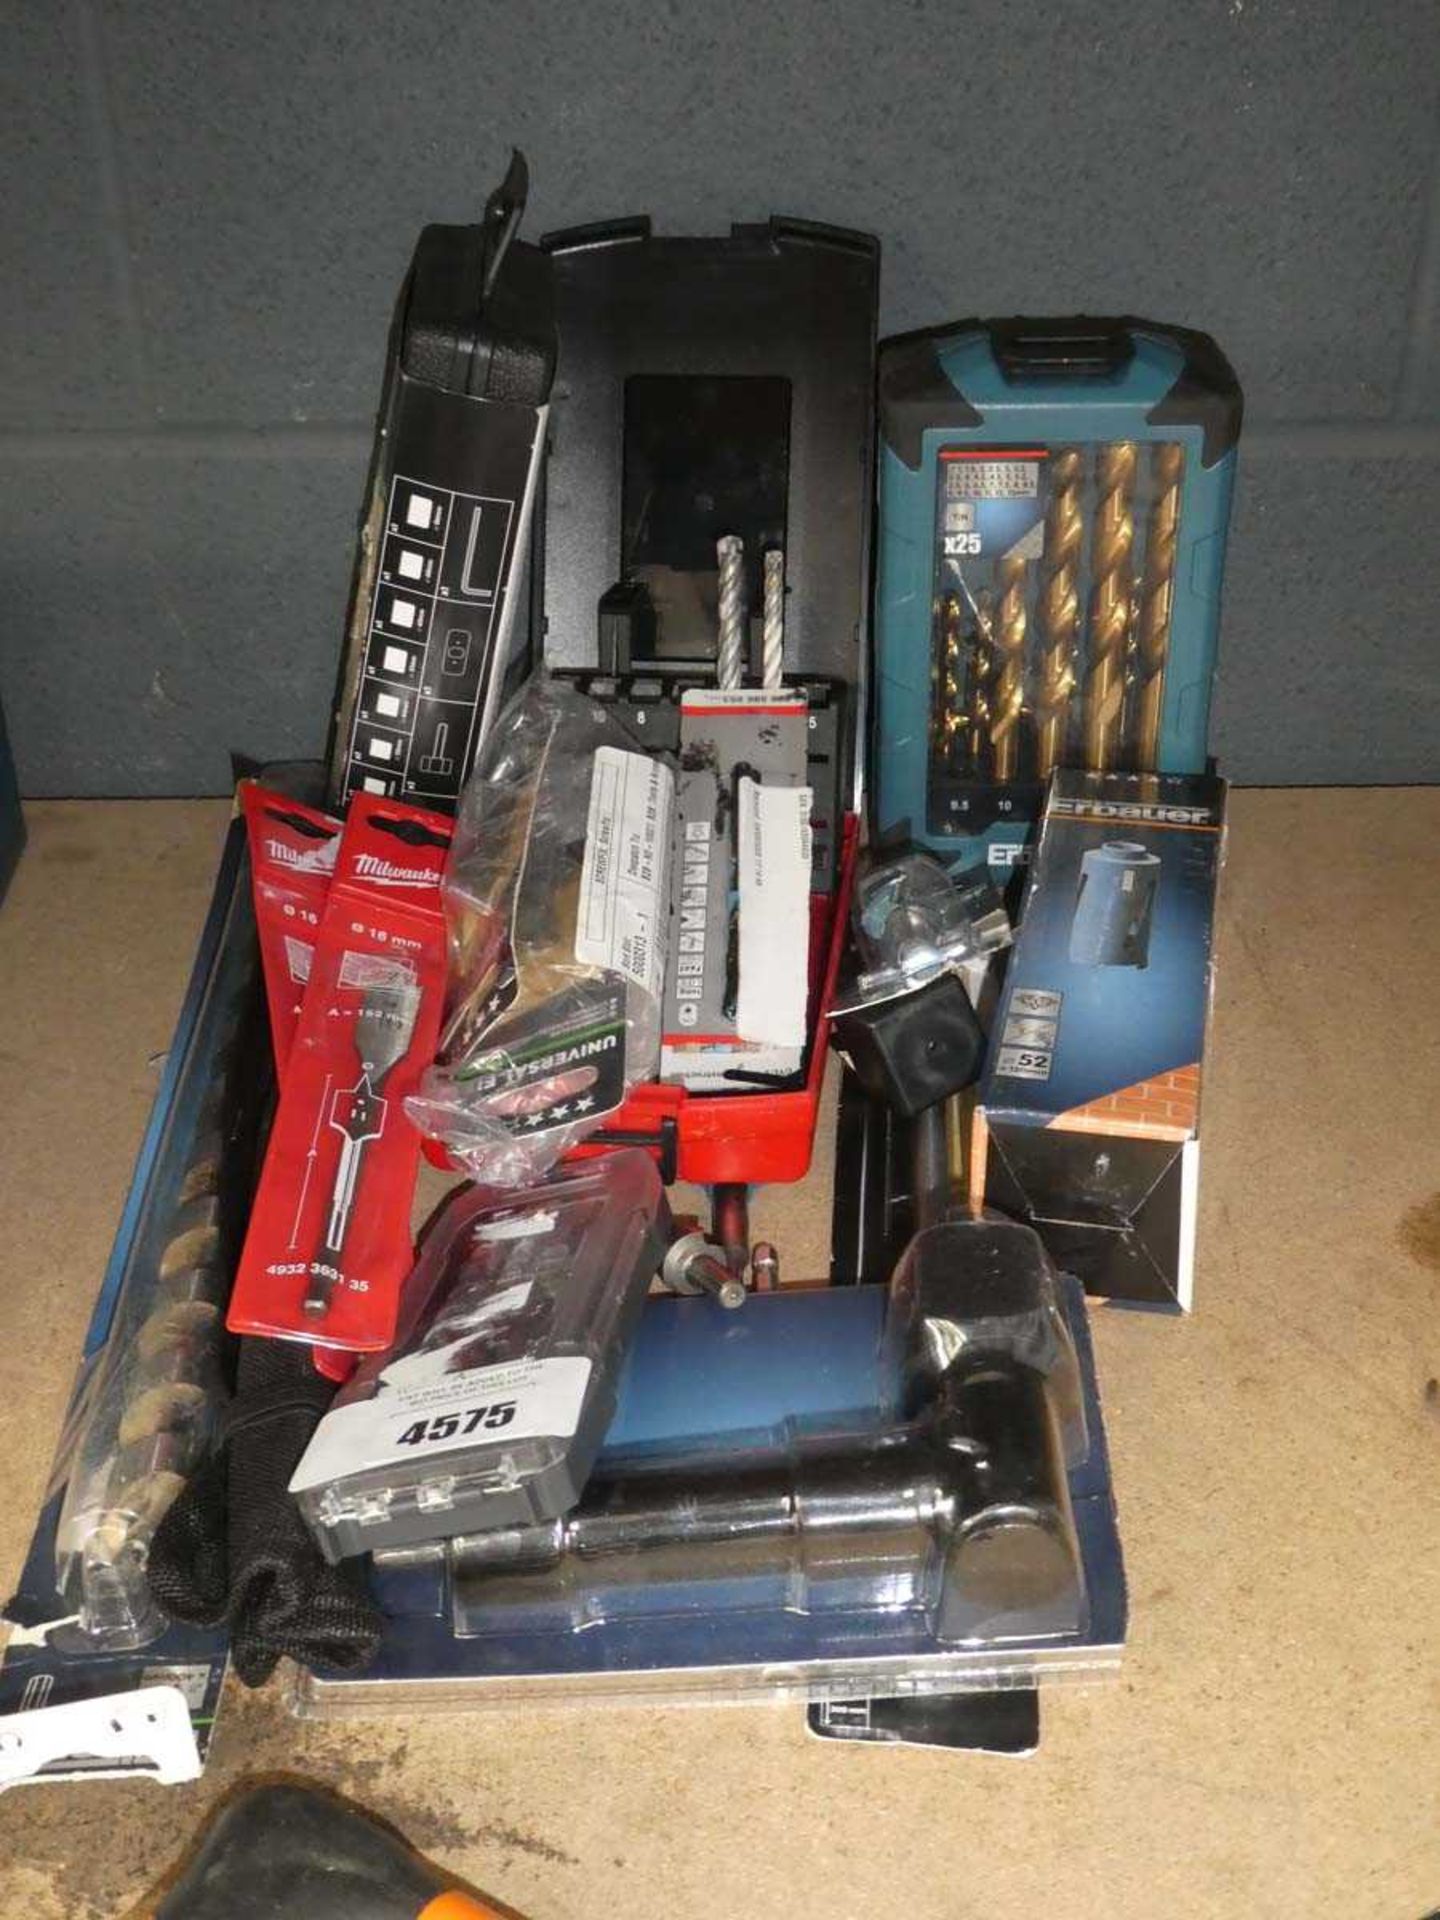 +VAT Assortment of tooling including hole saw, drill bits, drill angle head, wood & auger bits etc